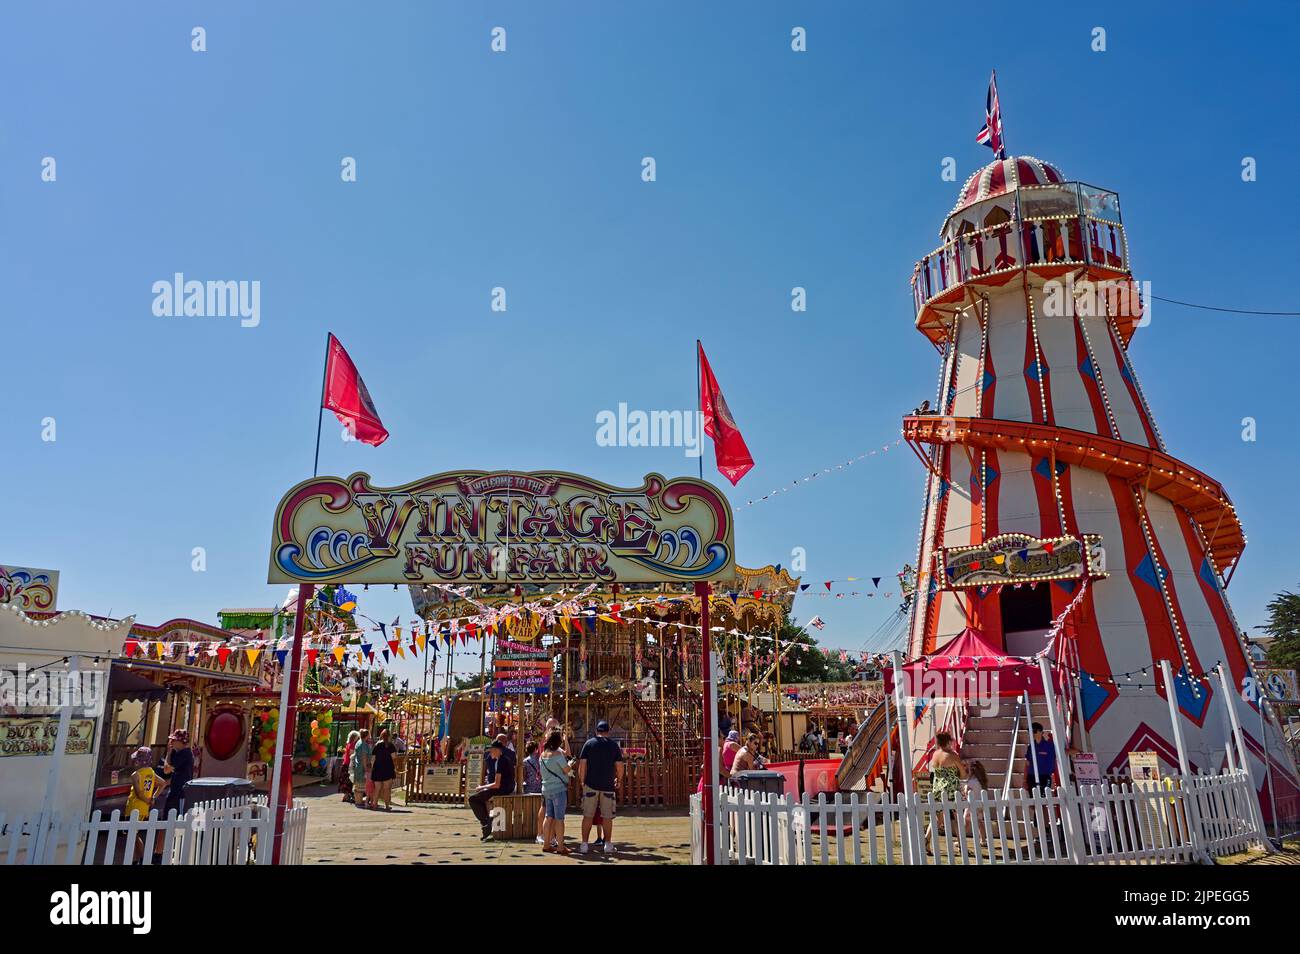 Vintage fun fair entrance with people enjoying the fairground on a hot sunny day Stock Photo